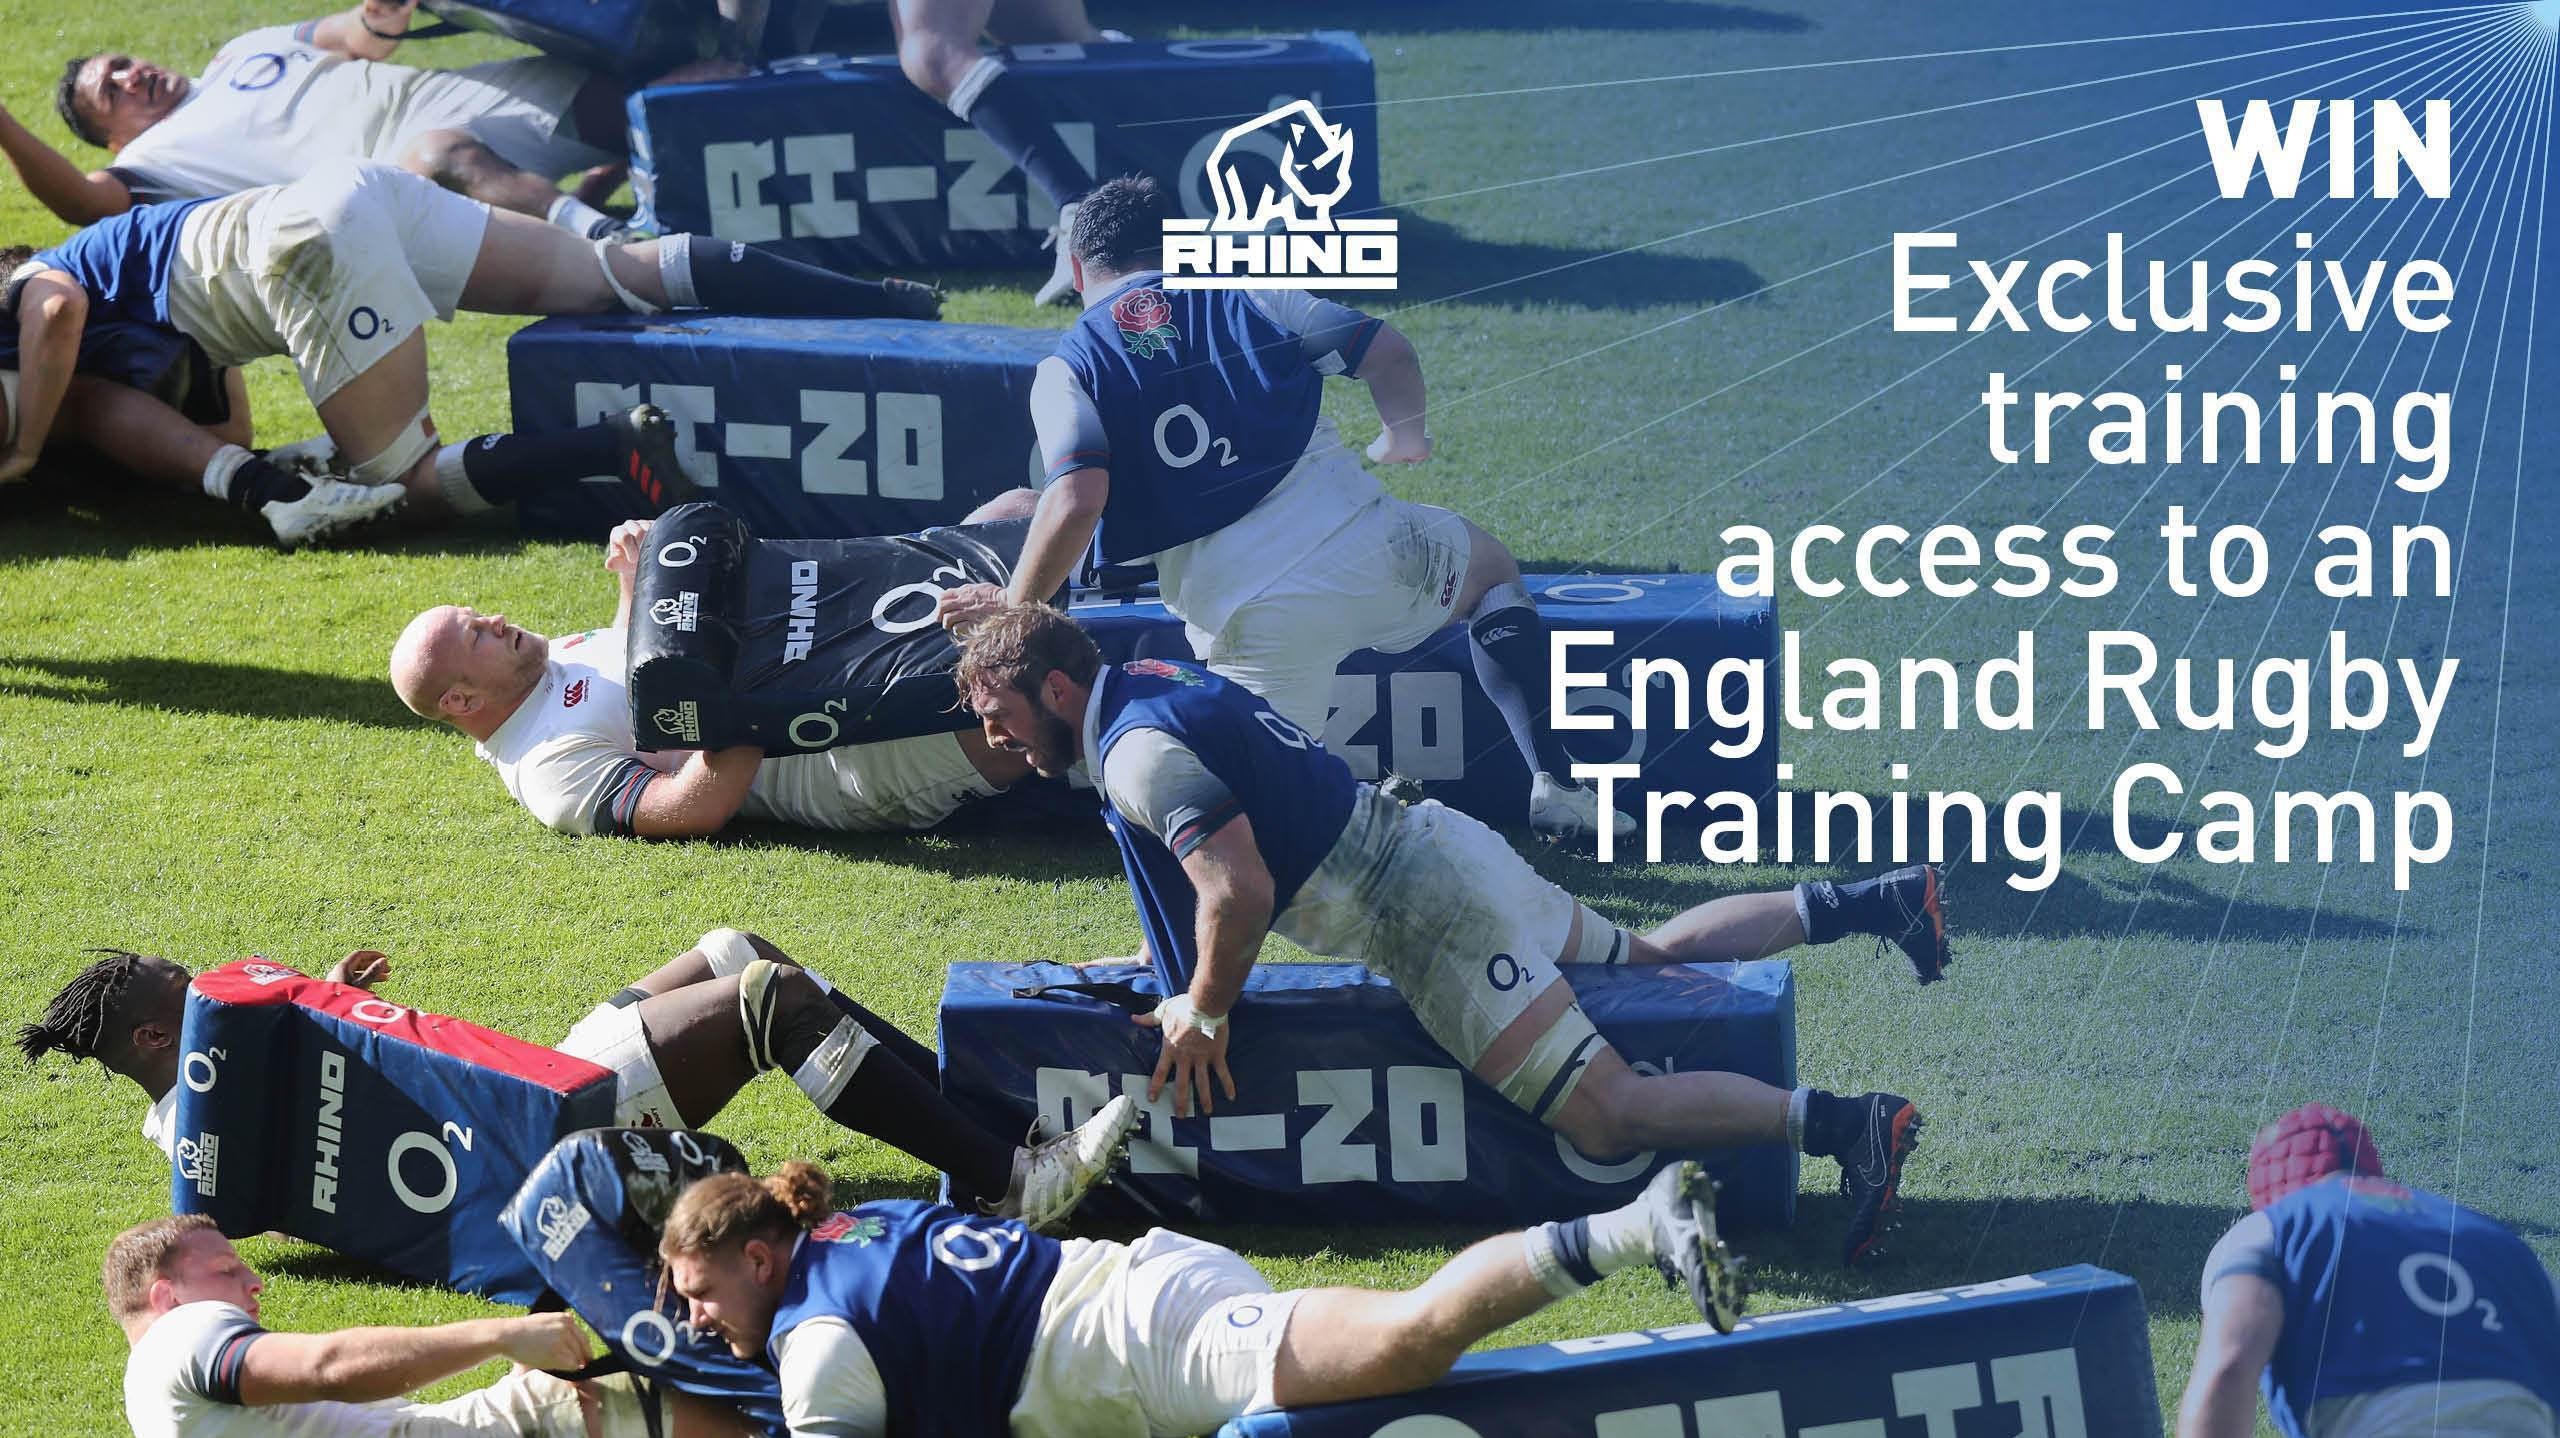 WIN the chance to attend an England Rugby training session